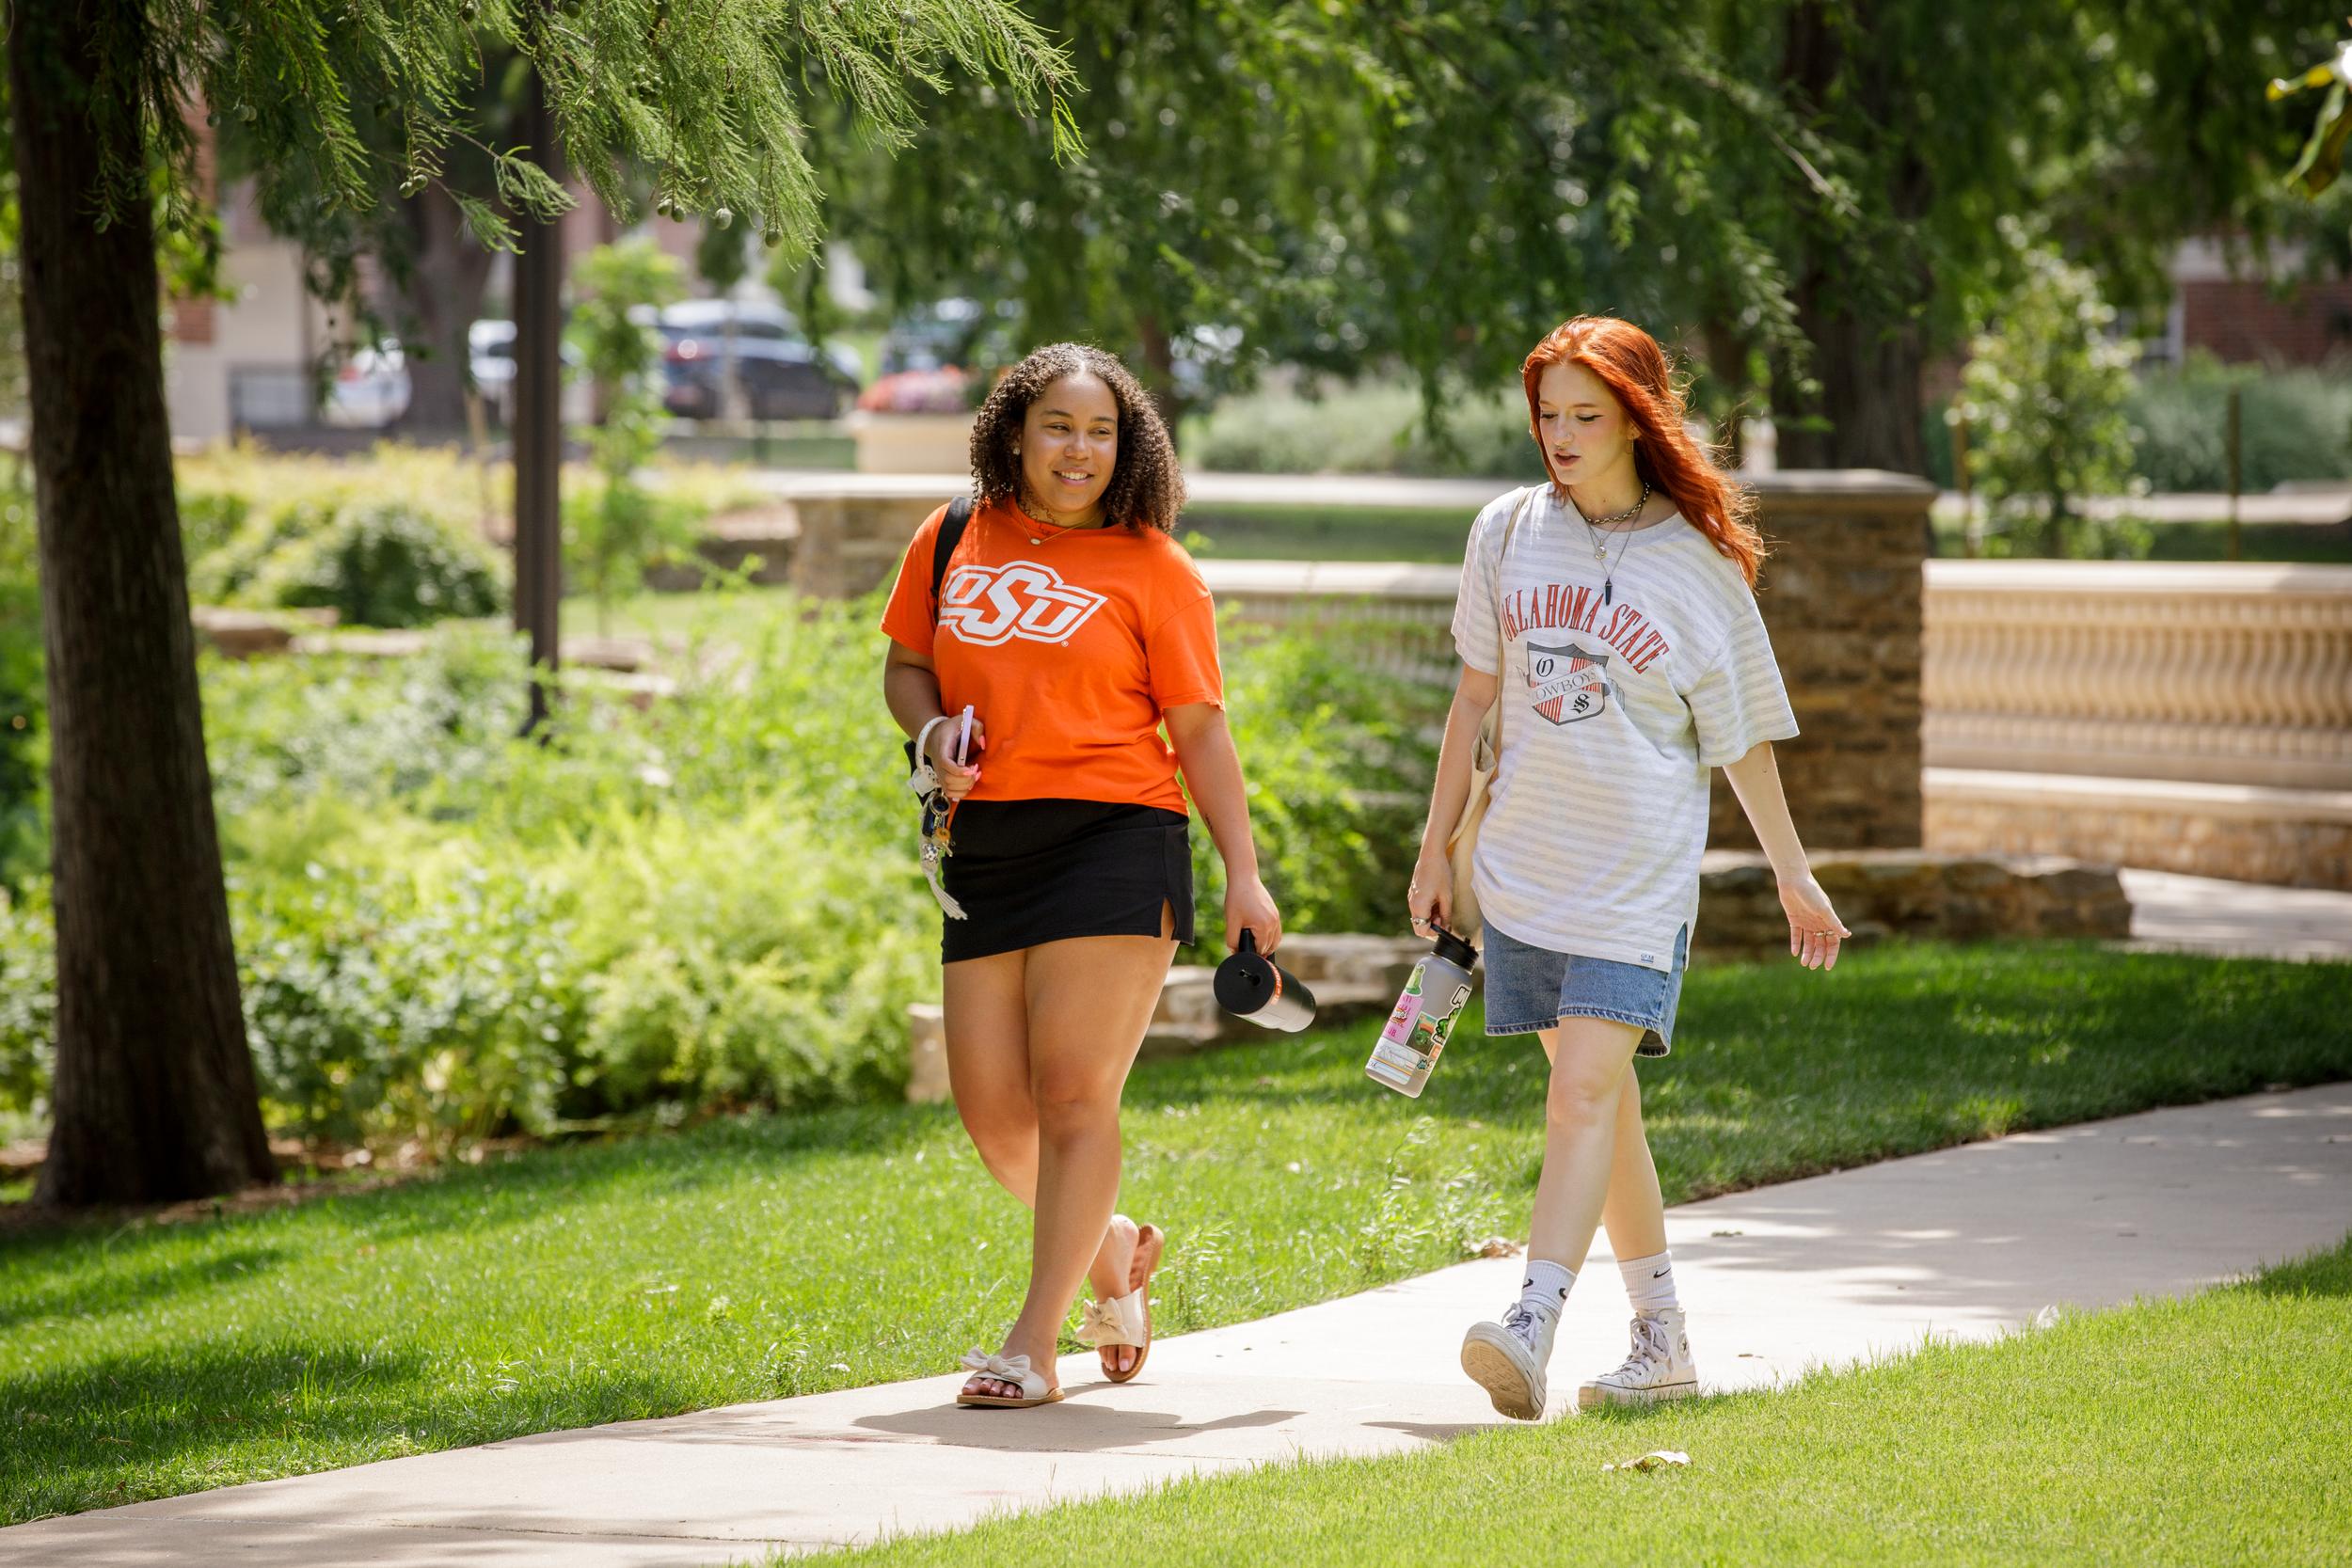 Two female college students are chatting while walking on a sidewalk.